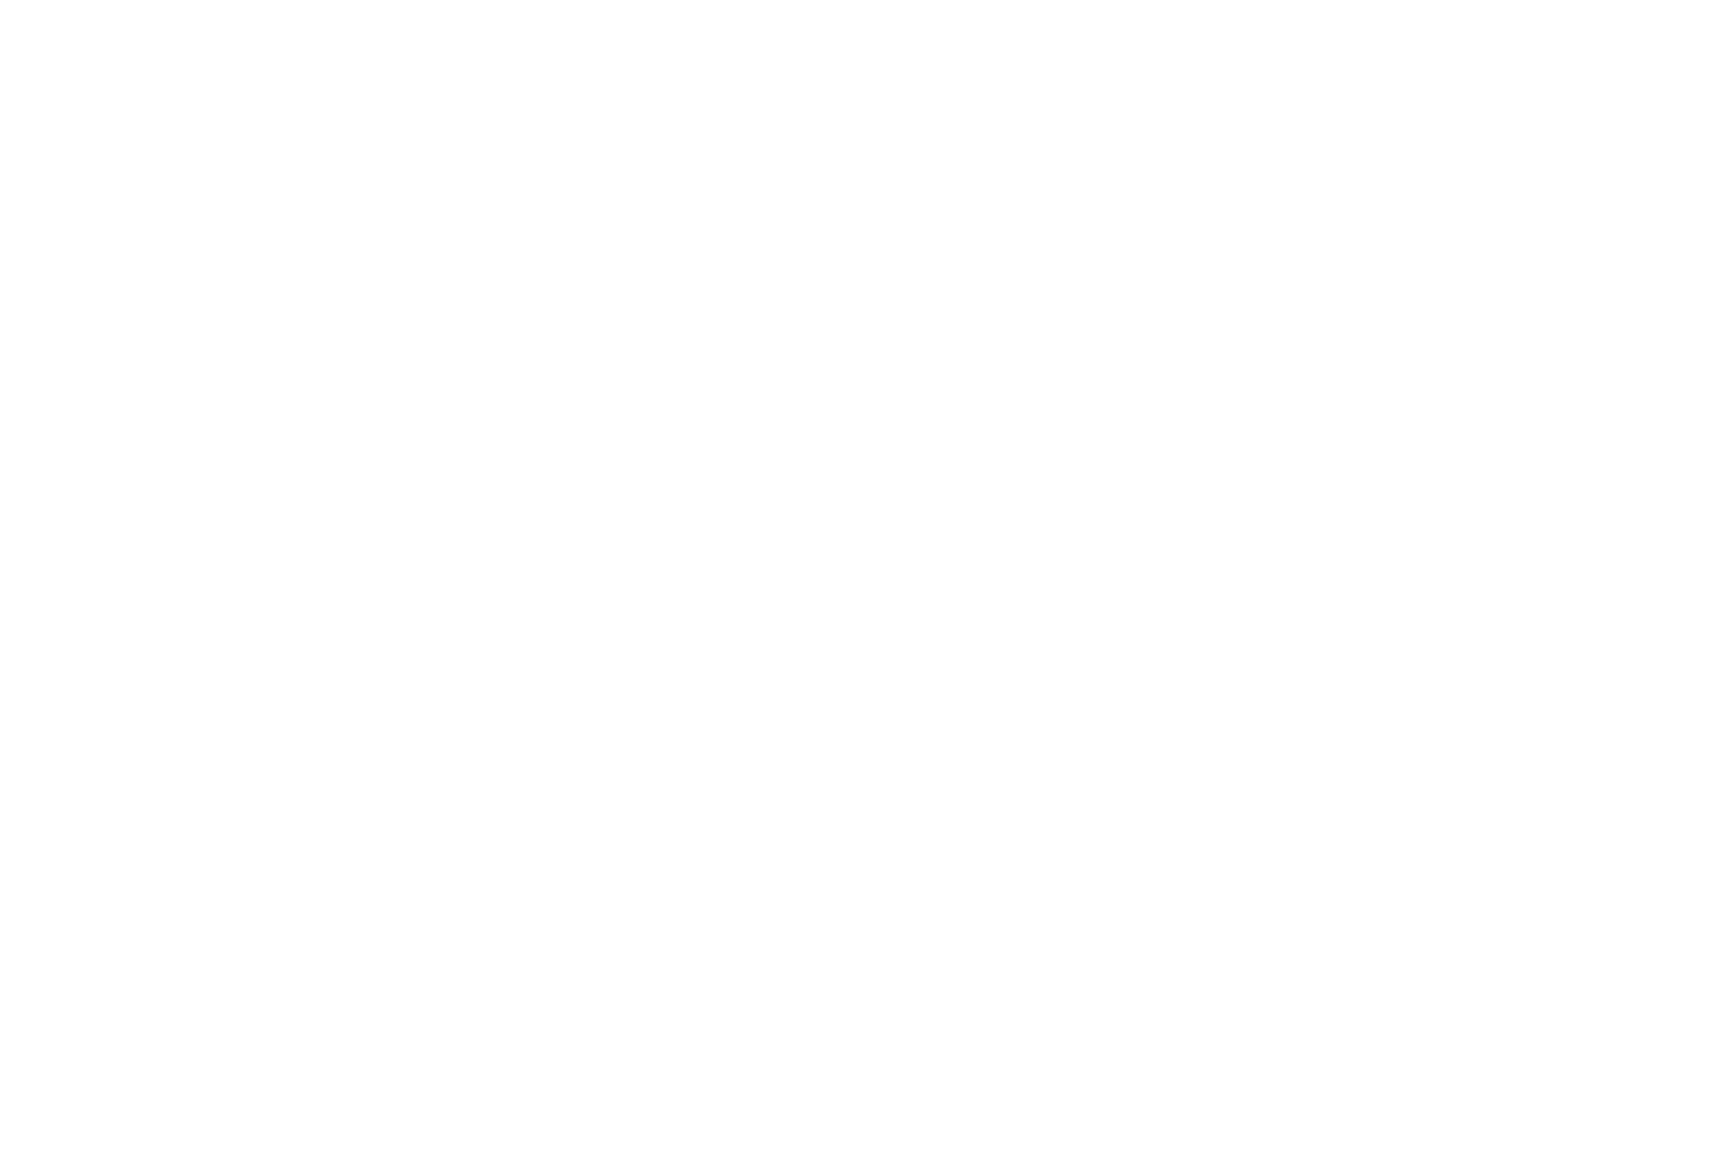 OFFICIAL SELECTION - Madrid Film Awards - 2021